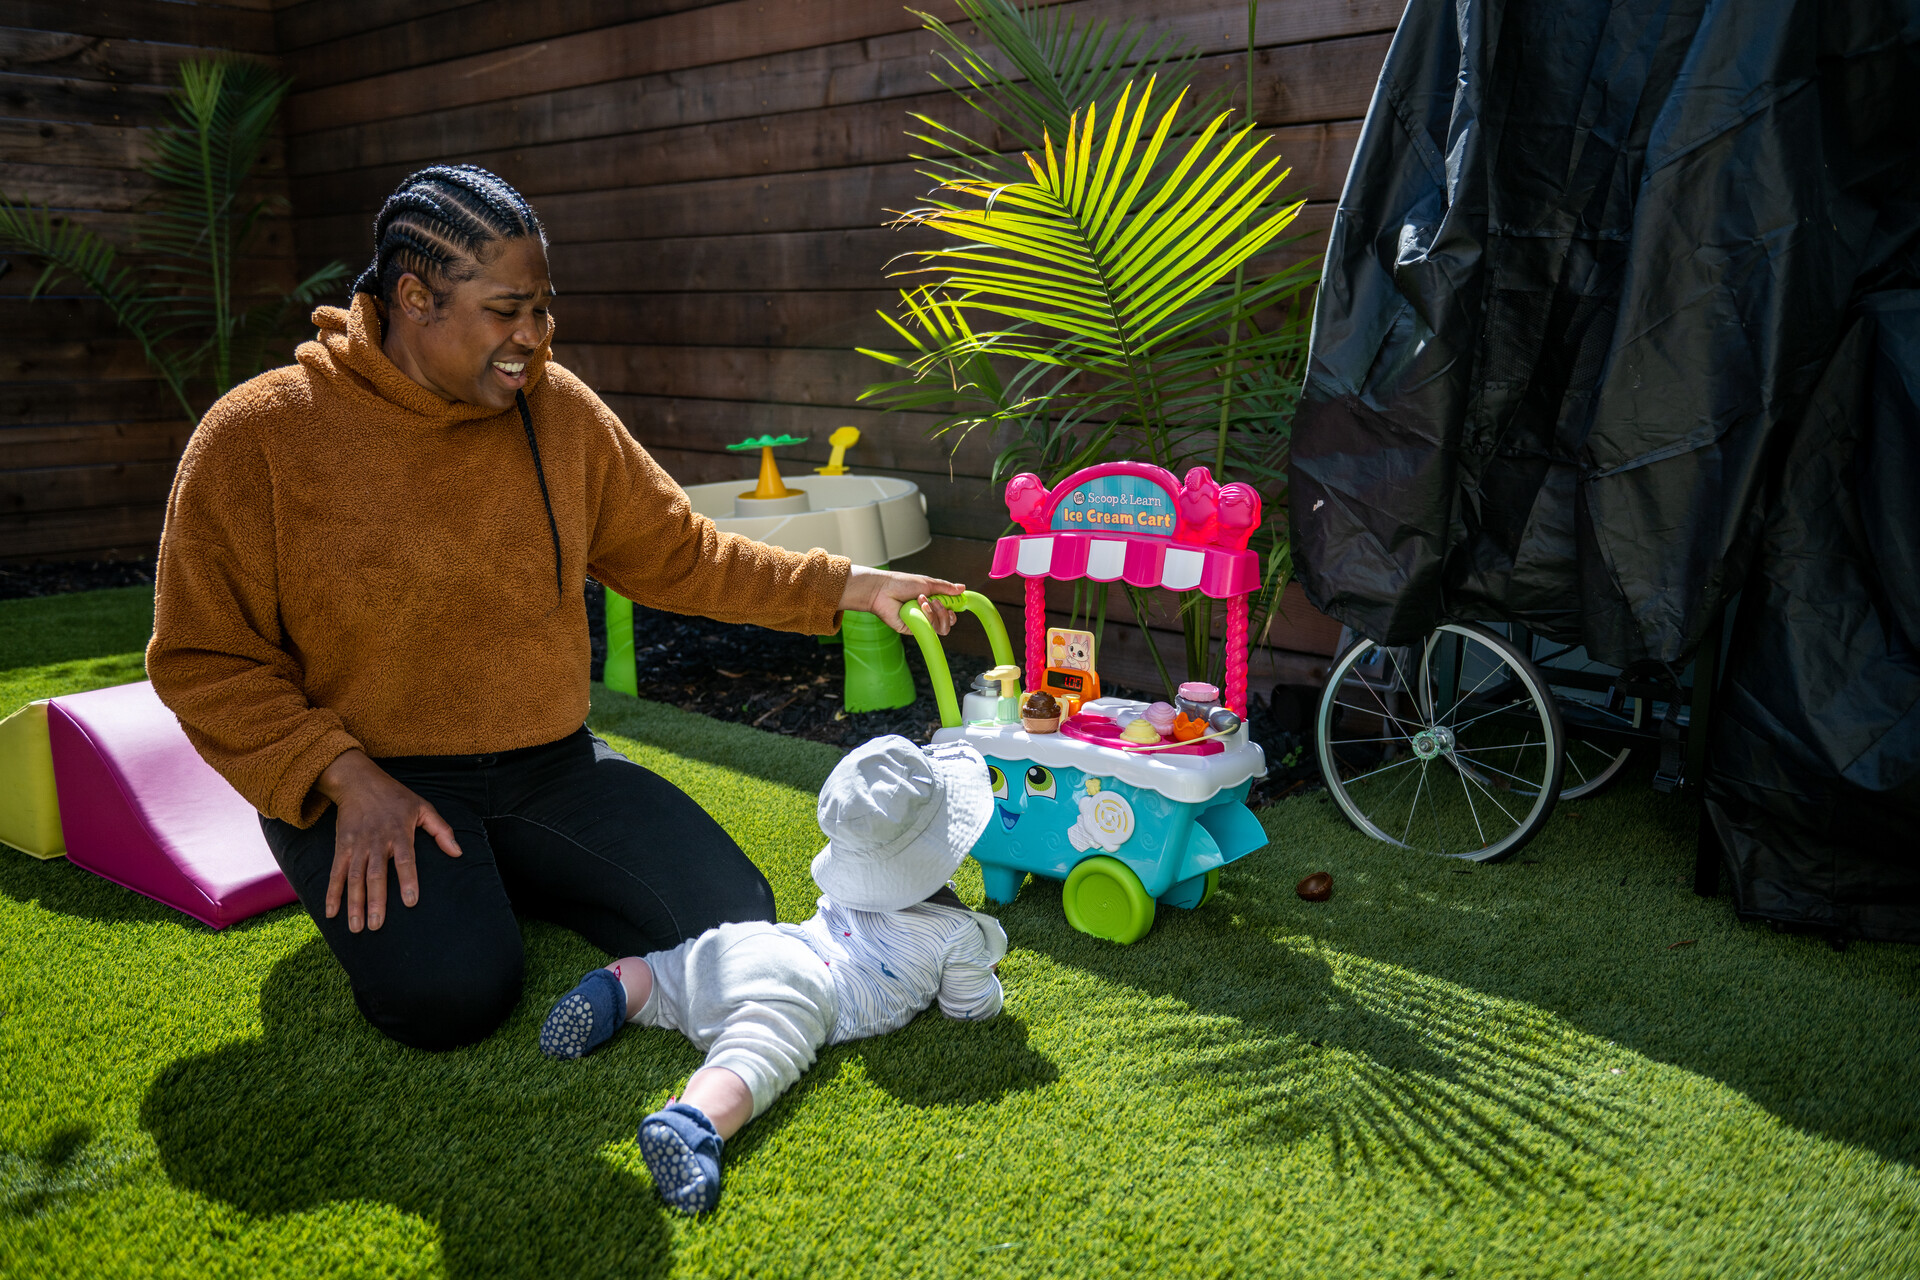 A woman with long, black braids and a brown hoodie plays with a baby in a sunhat in the backyard on a sunny day.